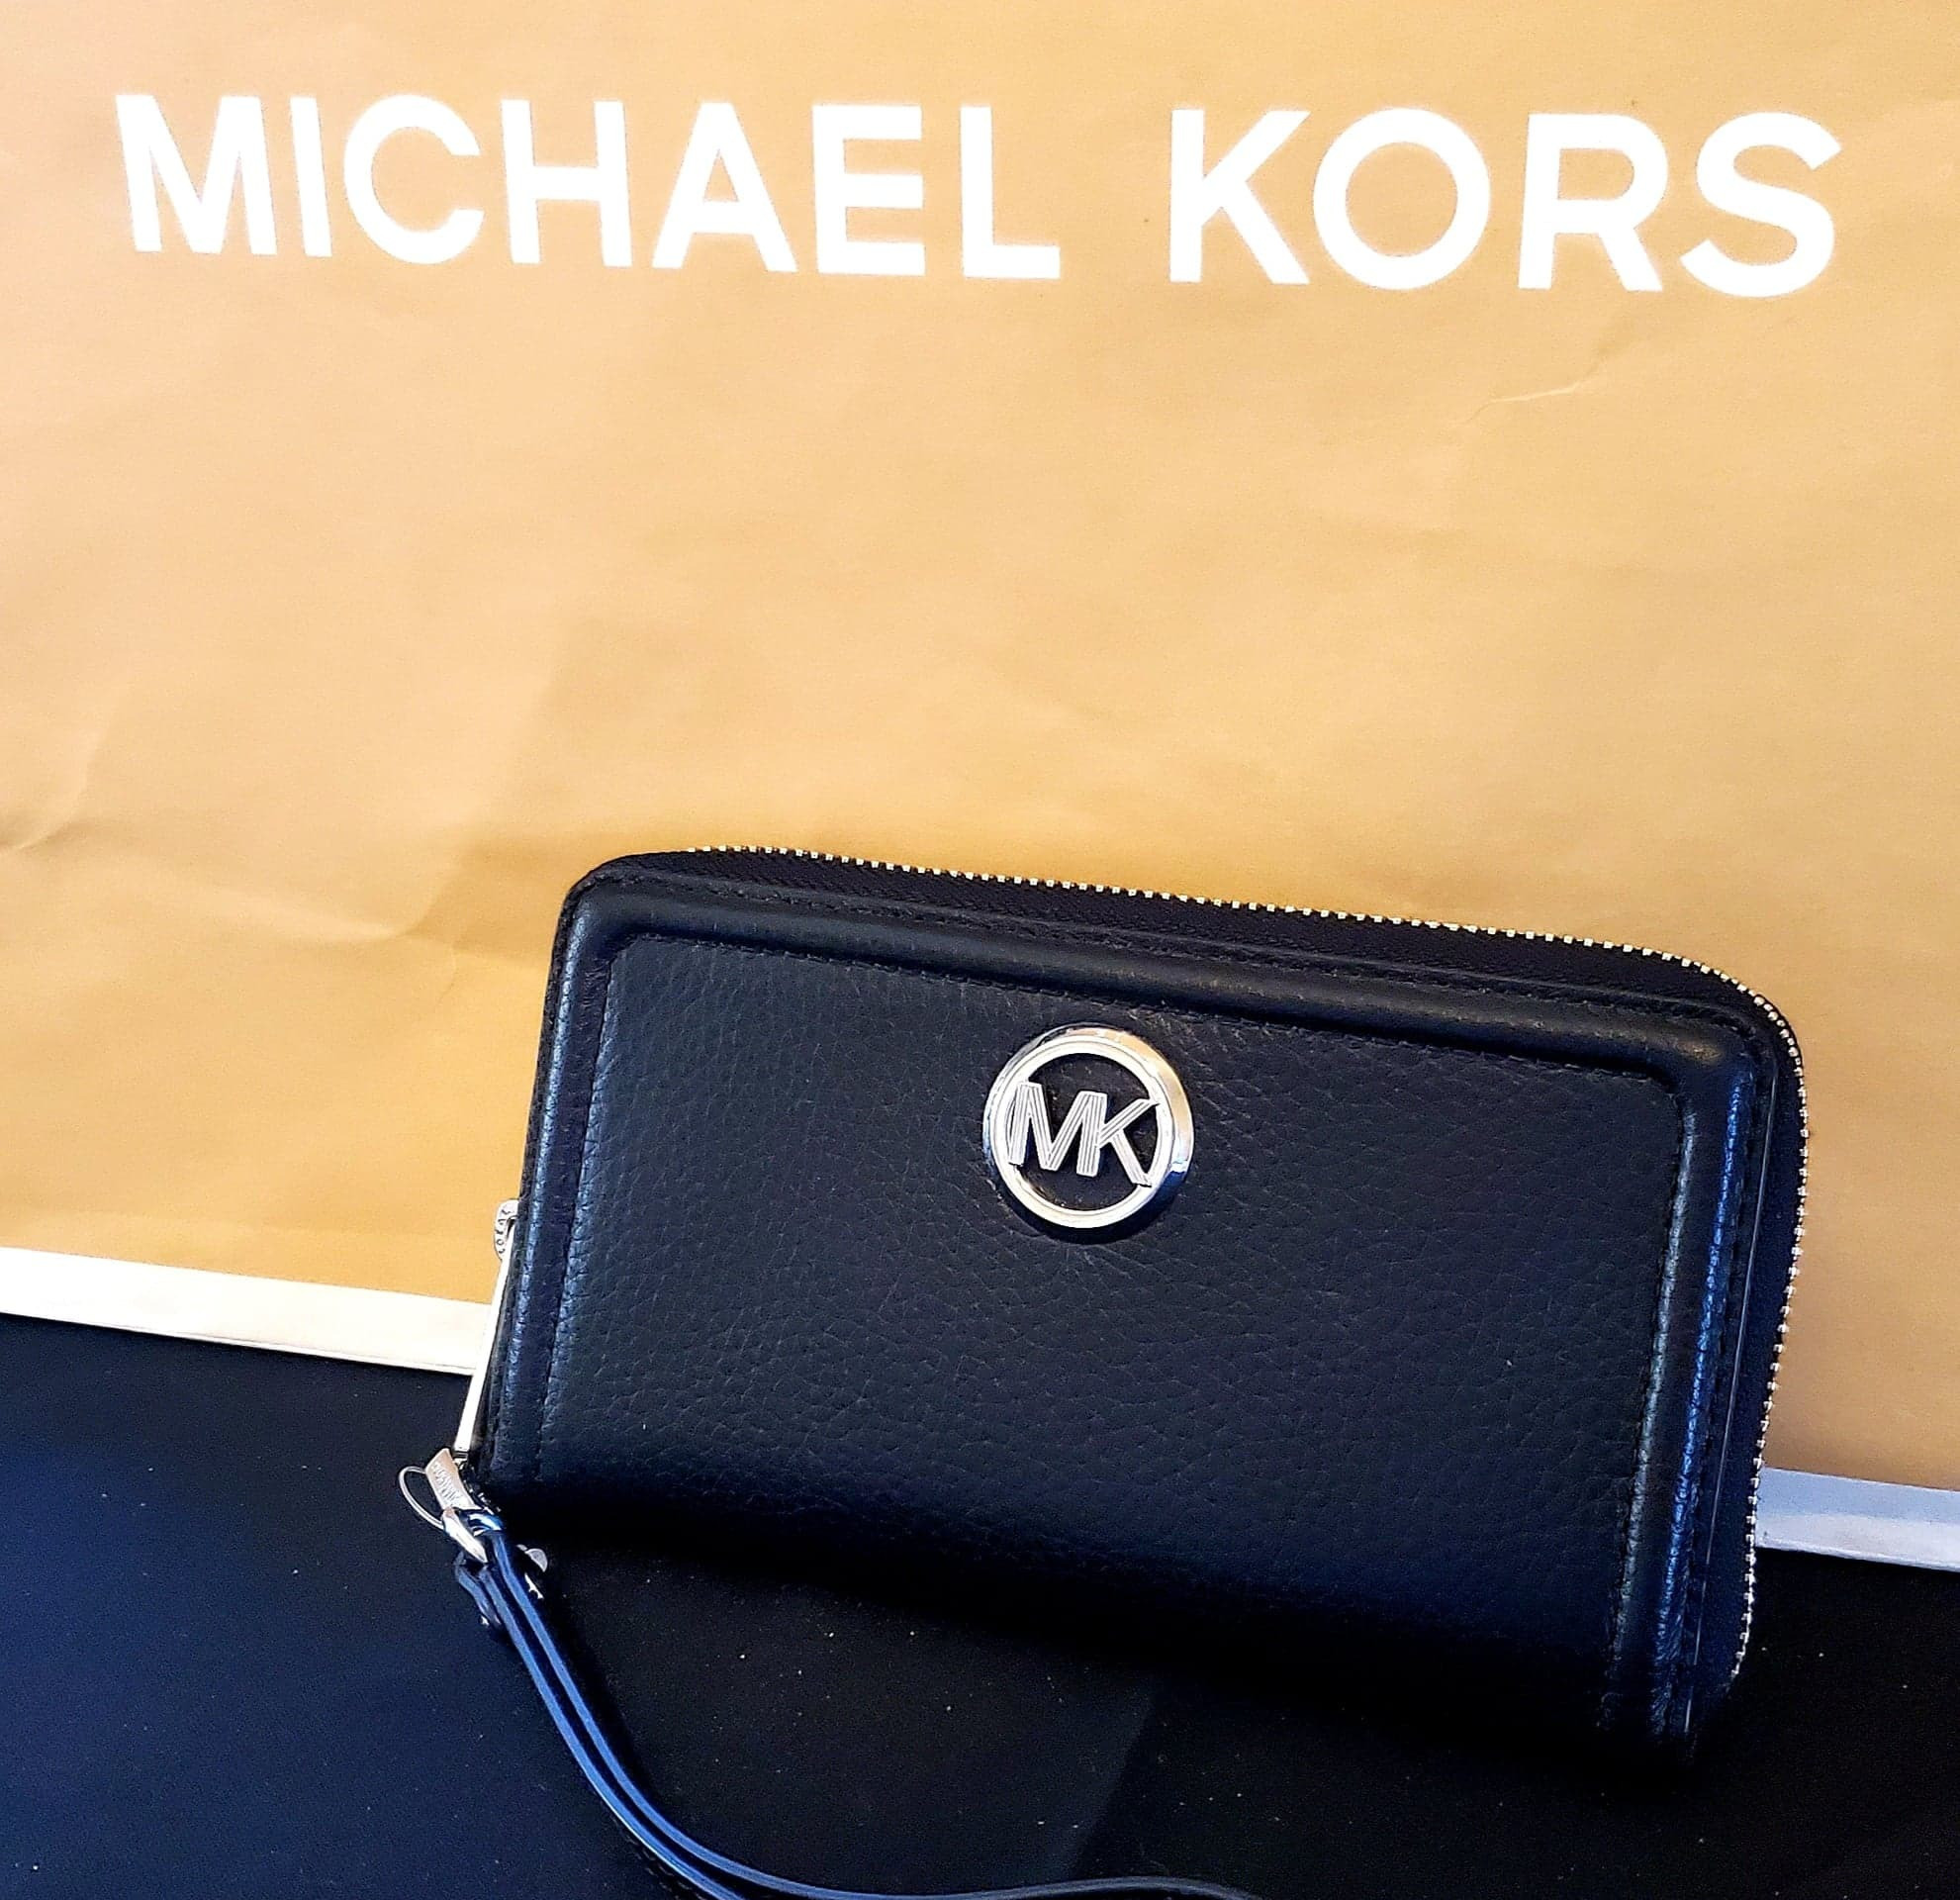 Black Michael Kors wallet with write strap. 100% authentic.